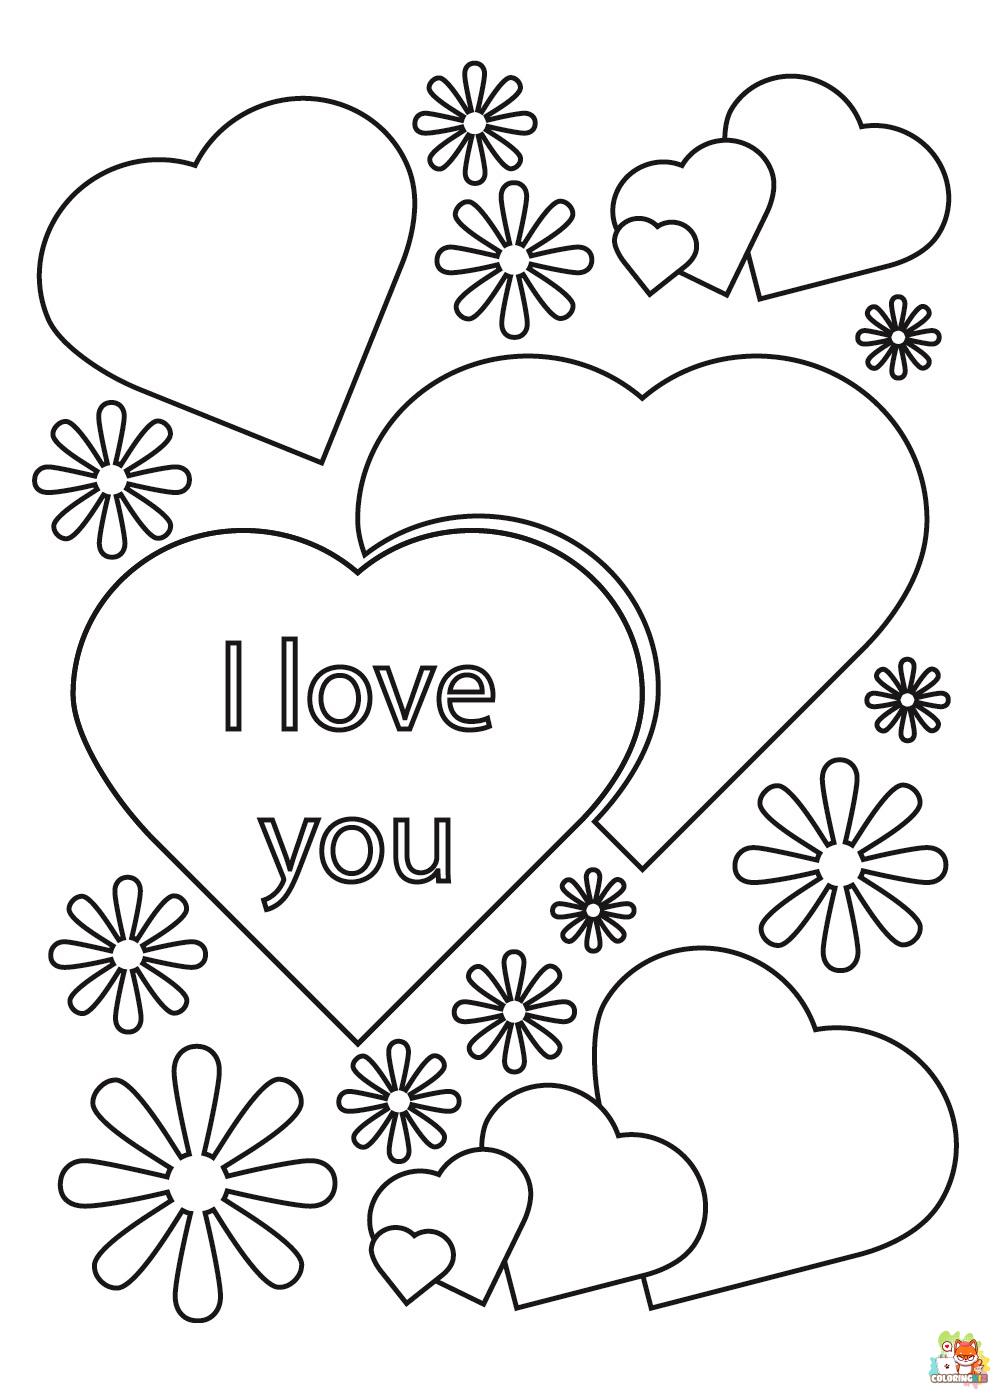 I Love You coloring pages printable 1